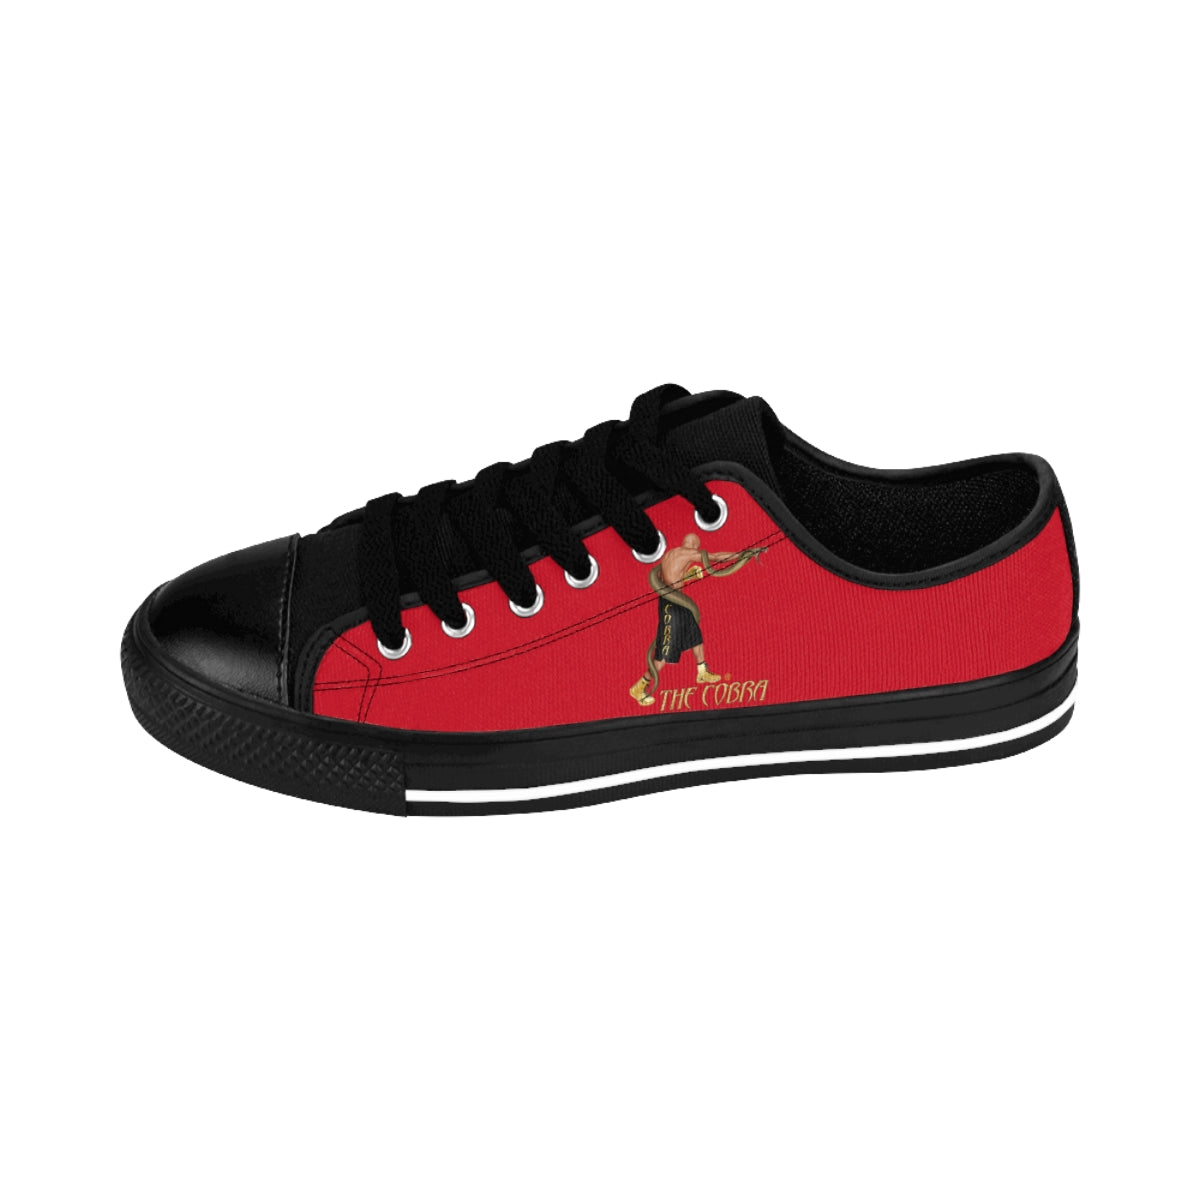 Red Cobra Low Top Women's Weight Lifting Shoes